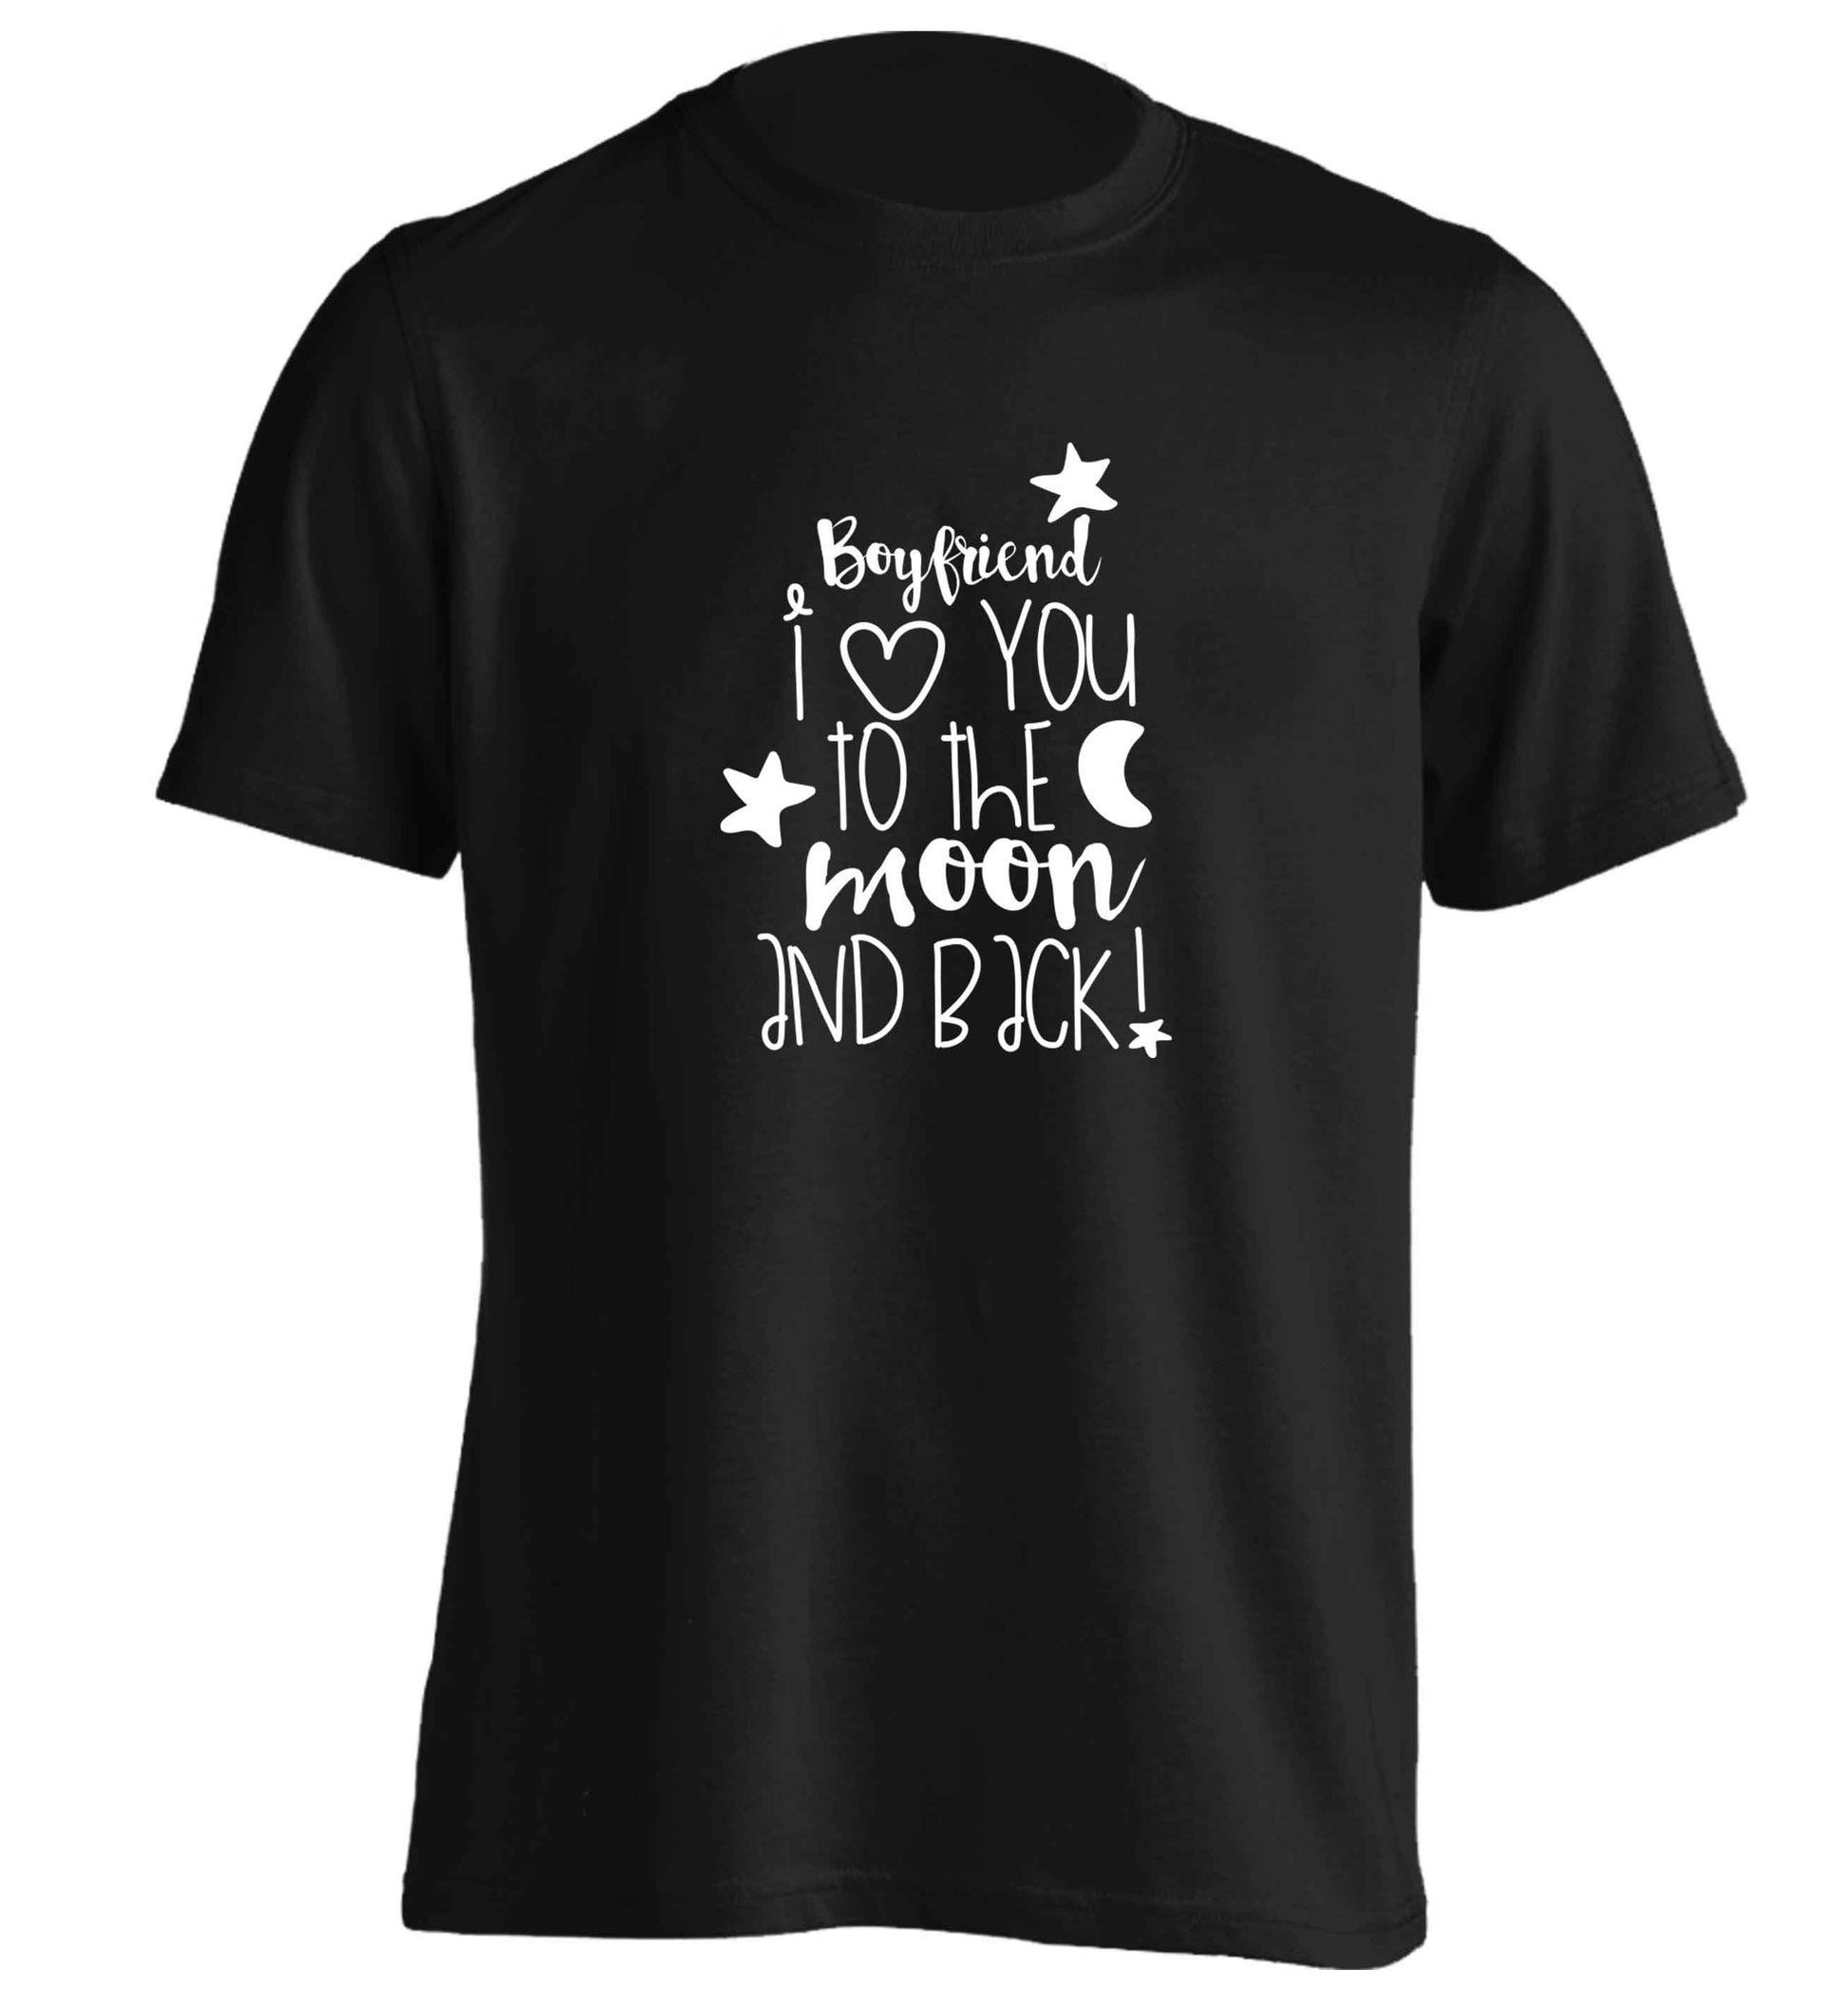 Boyfriend I love you to the moon and back adults unisex black Tshirt 2XL